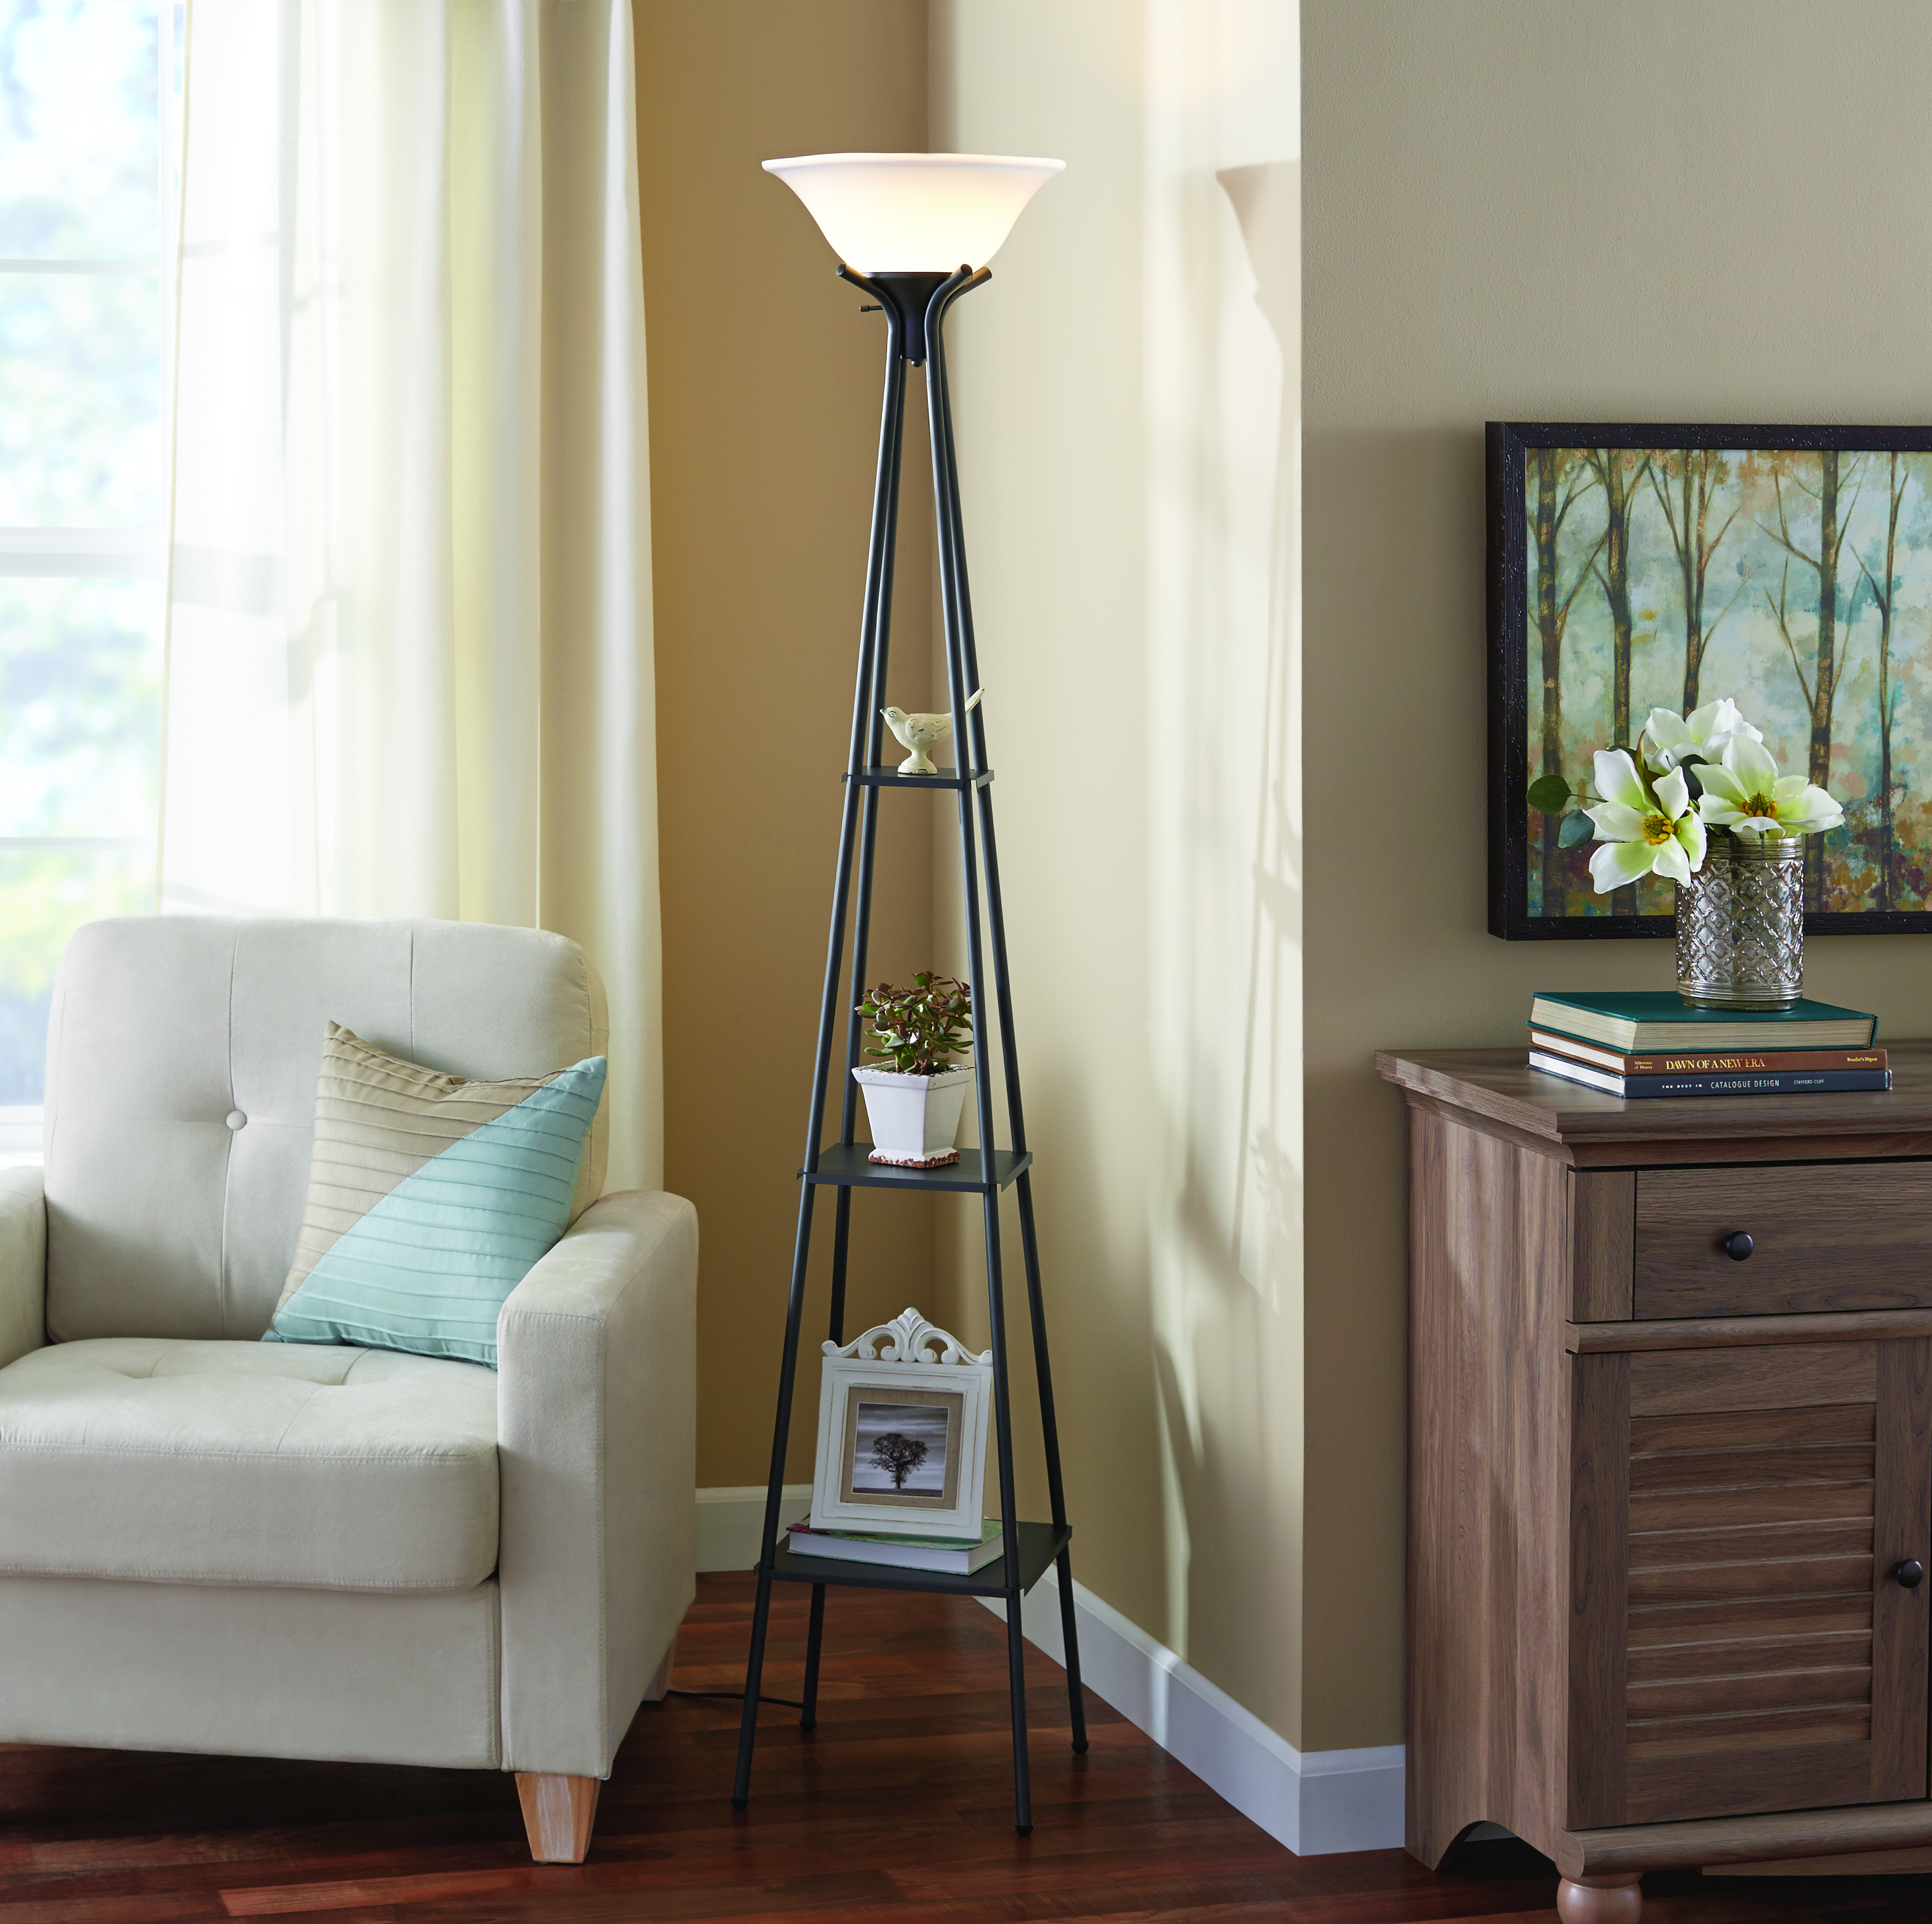 Mainstays 69 Etagere Floor Lamp Dark Charcoal Finish with sizing 4312 X 4294